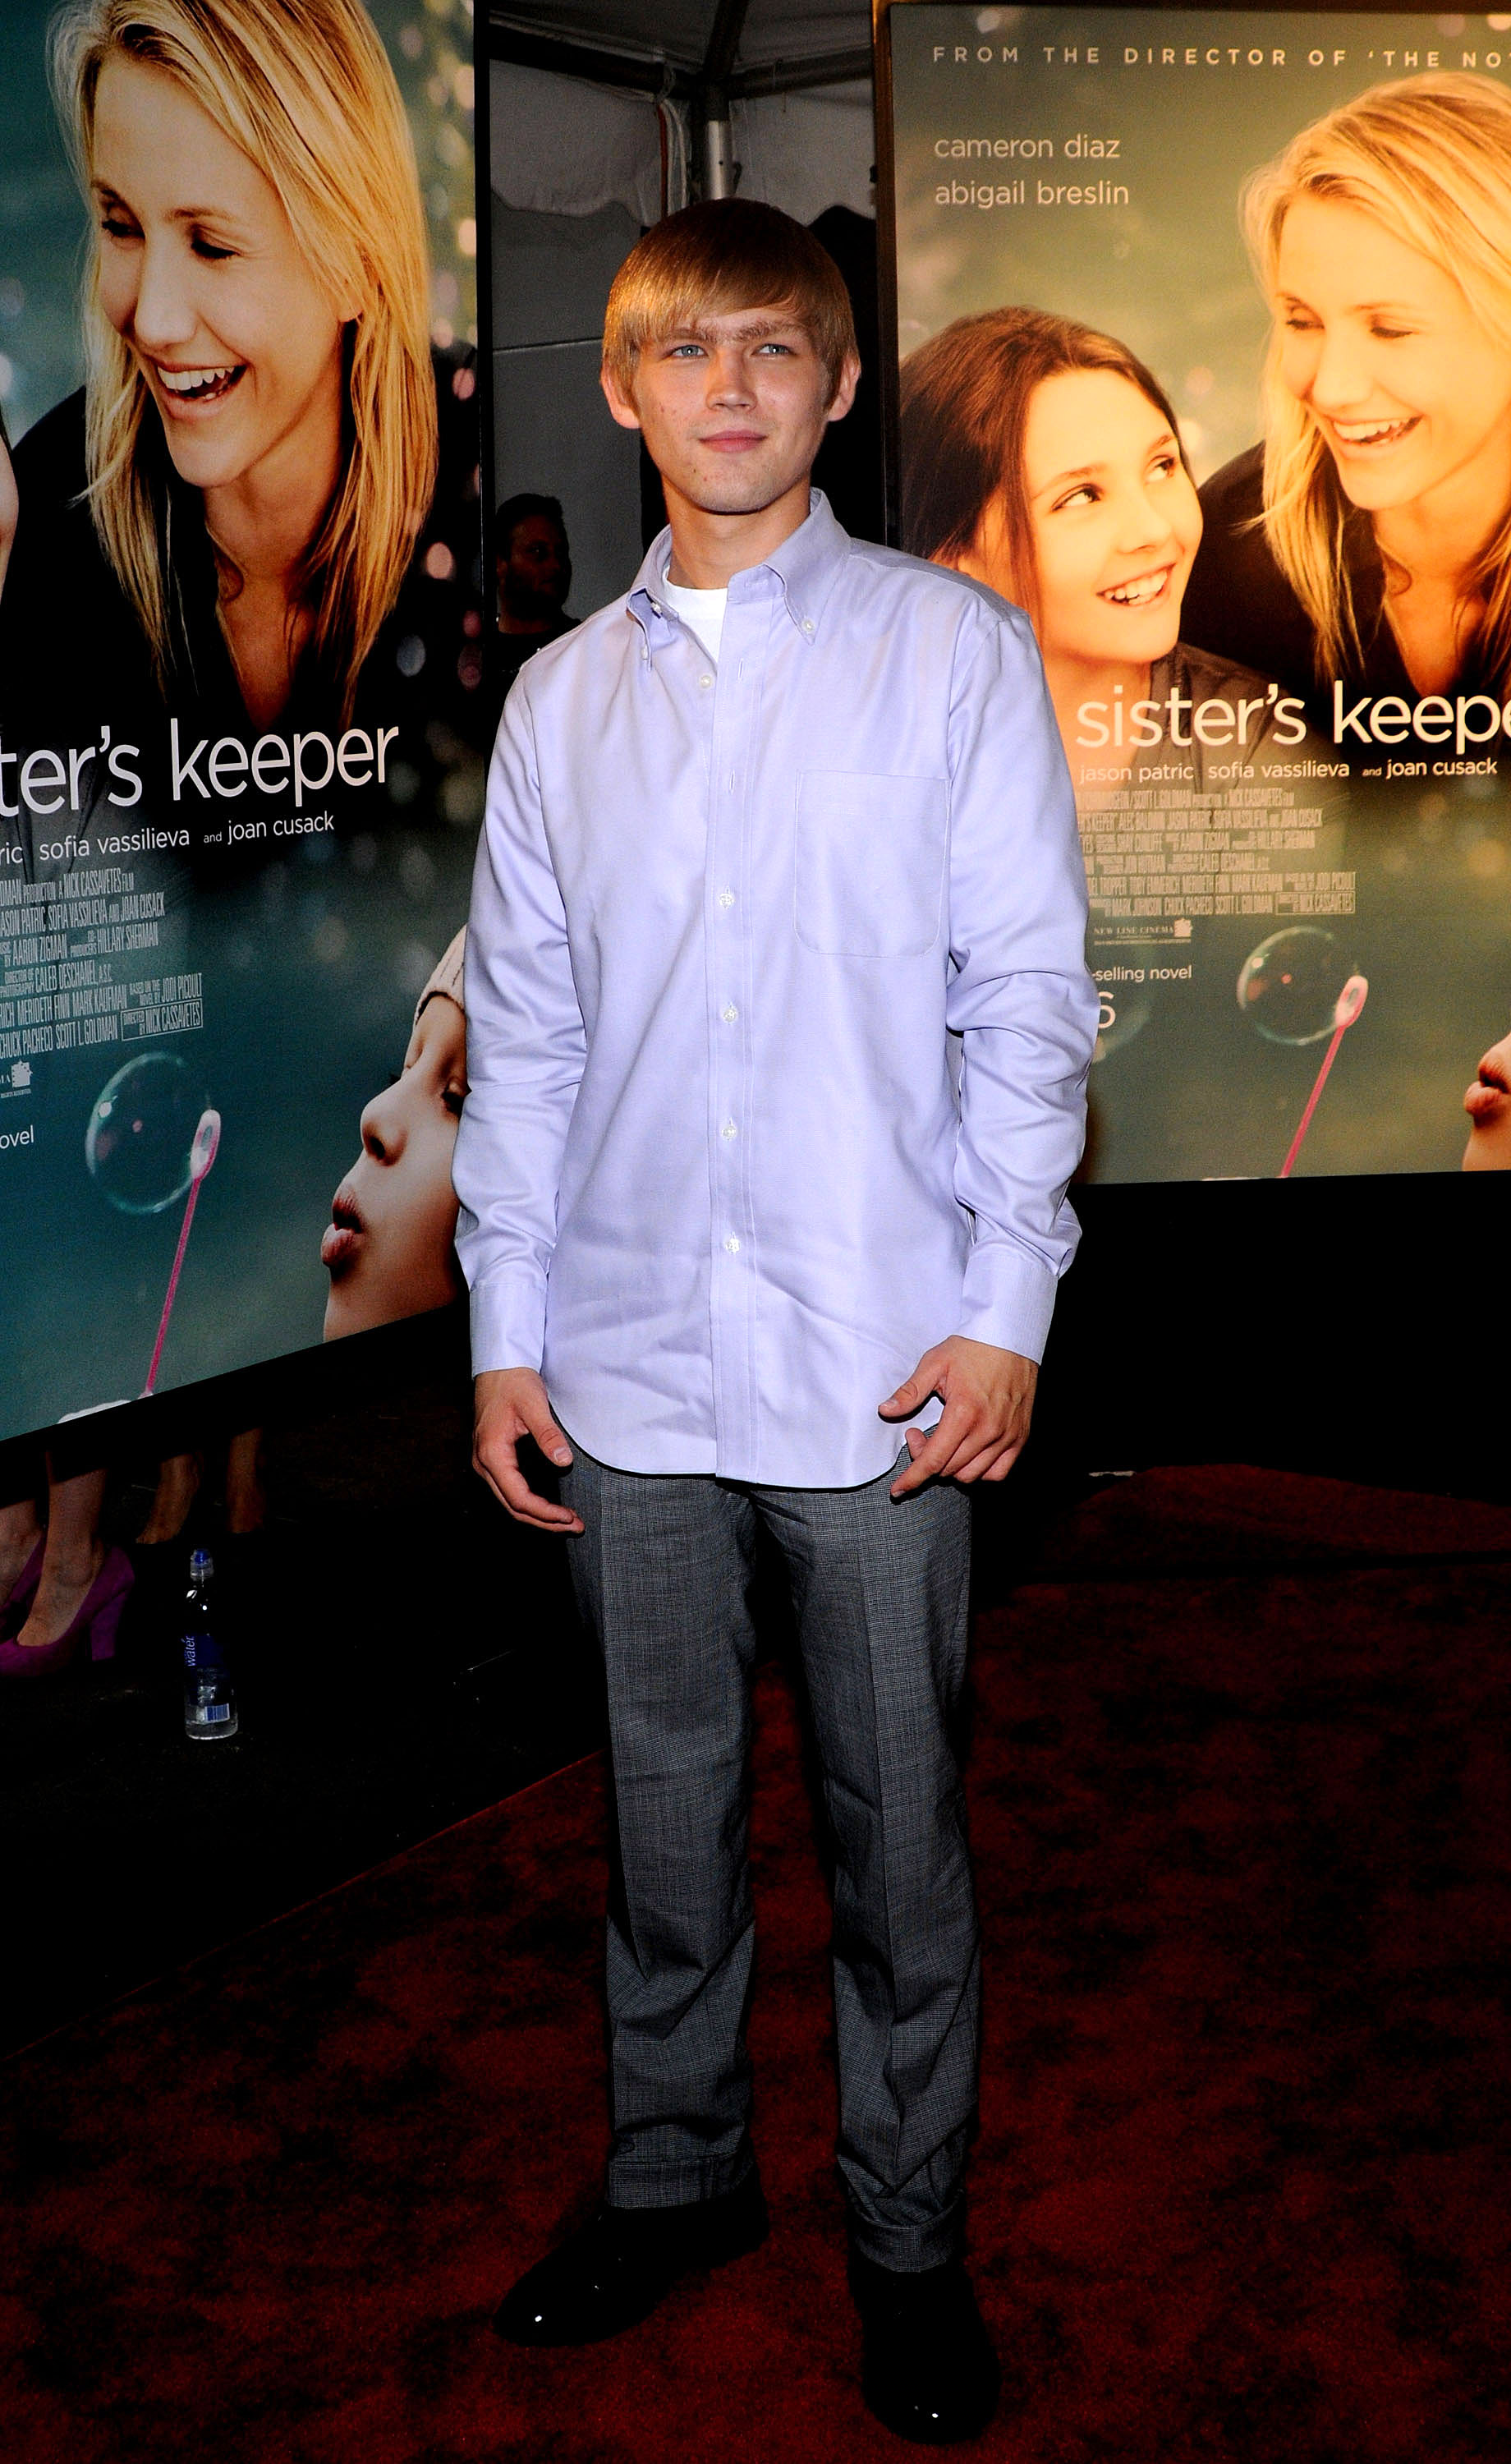 Evan Ellingson at the premiere of "My Sister's Keeper" in New York City on June 24, 2009. | Source: Getty Images